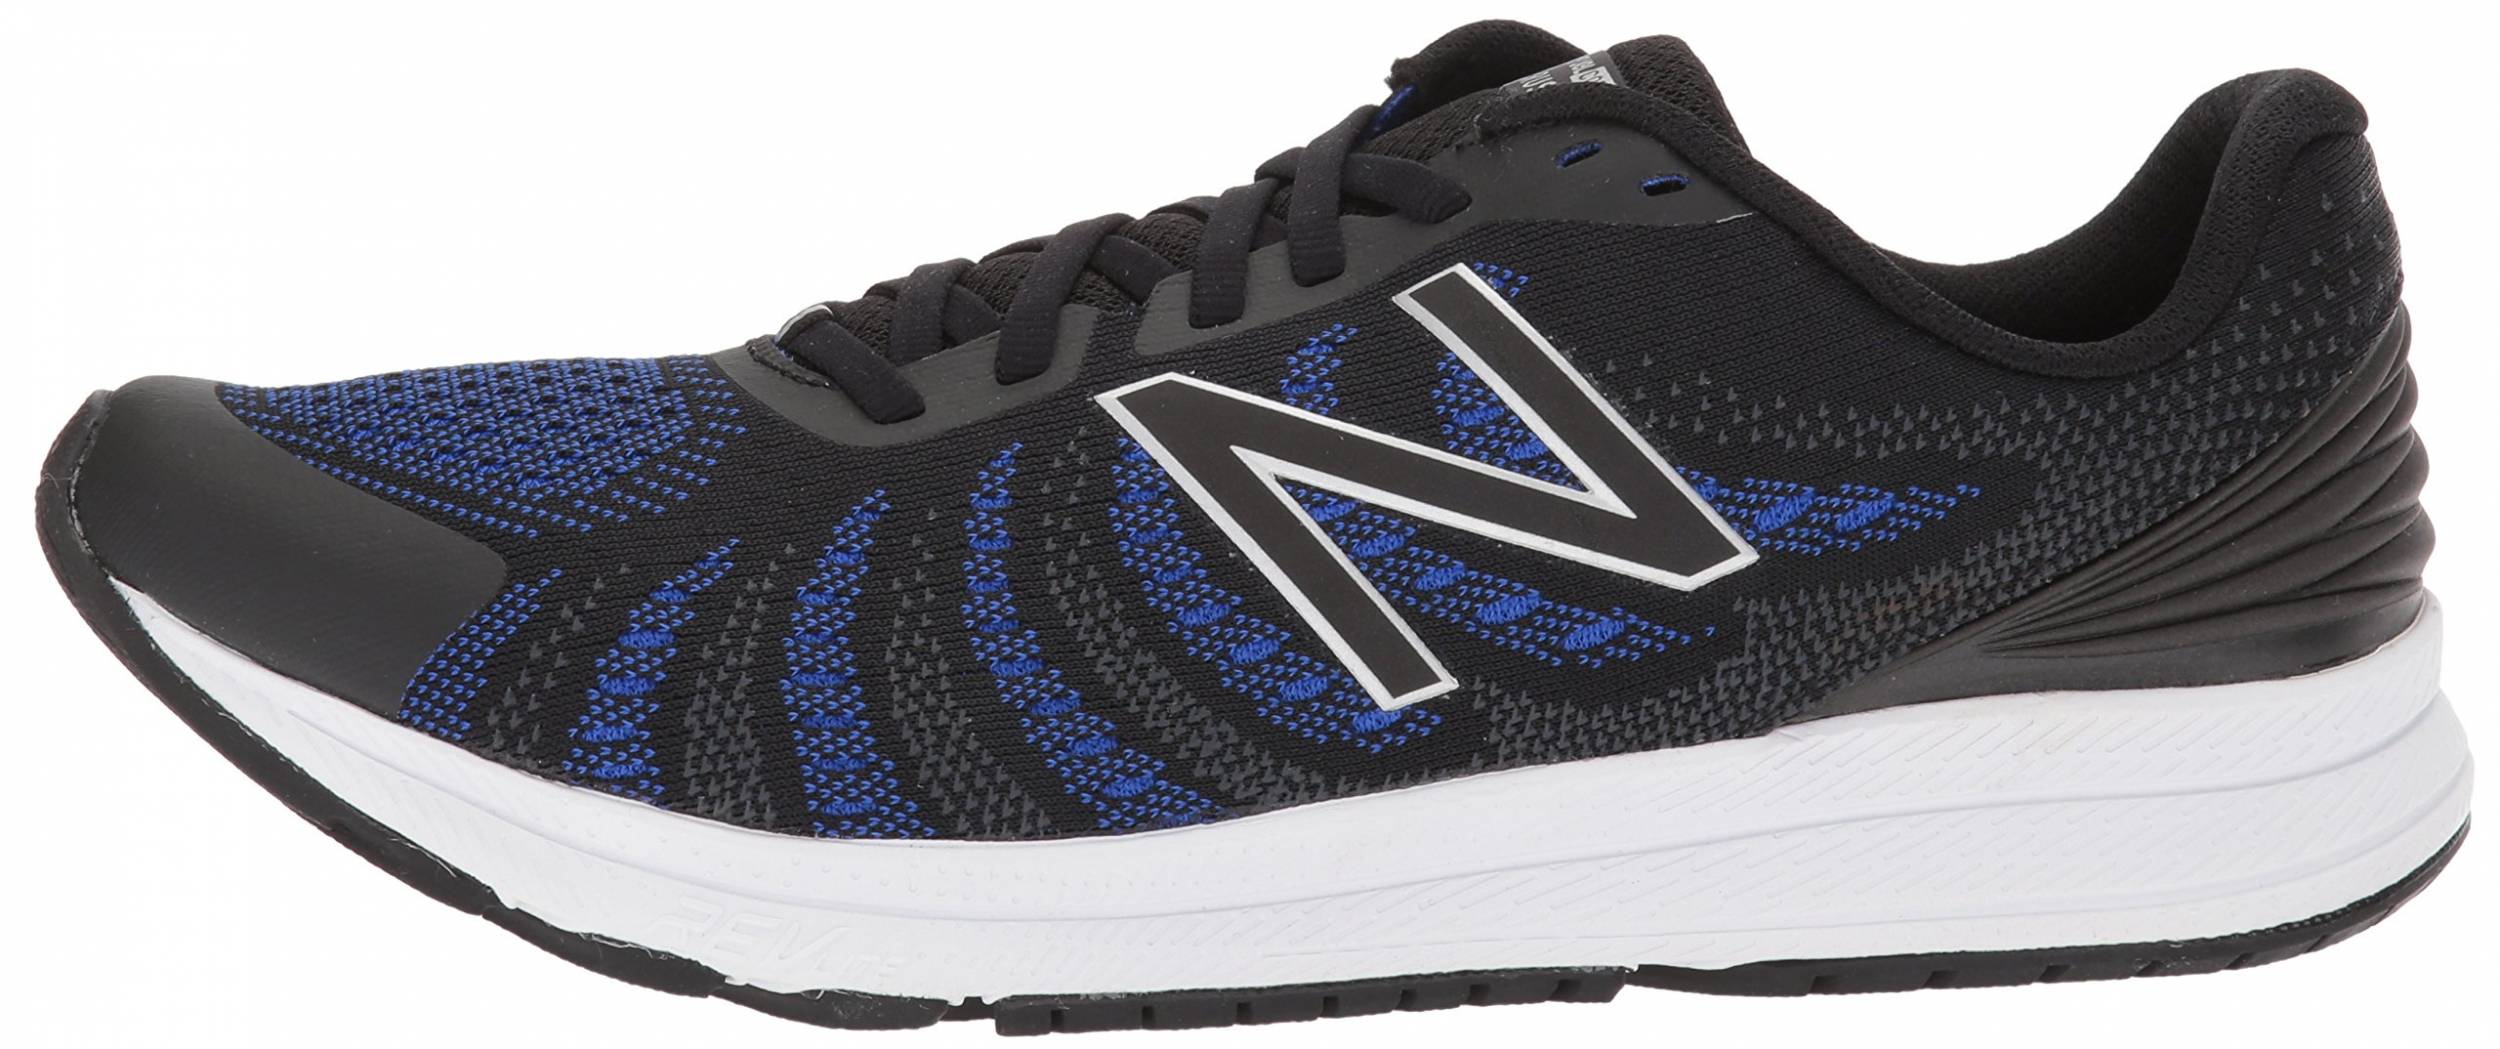 new balance fuelcore running shoes